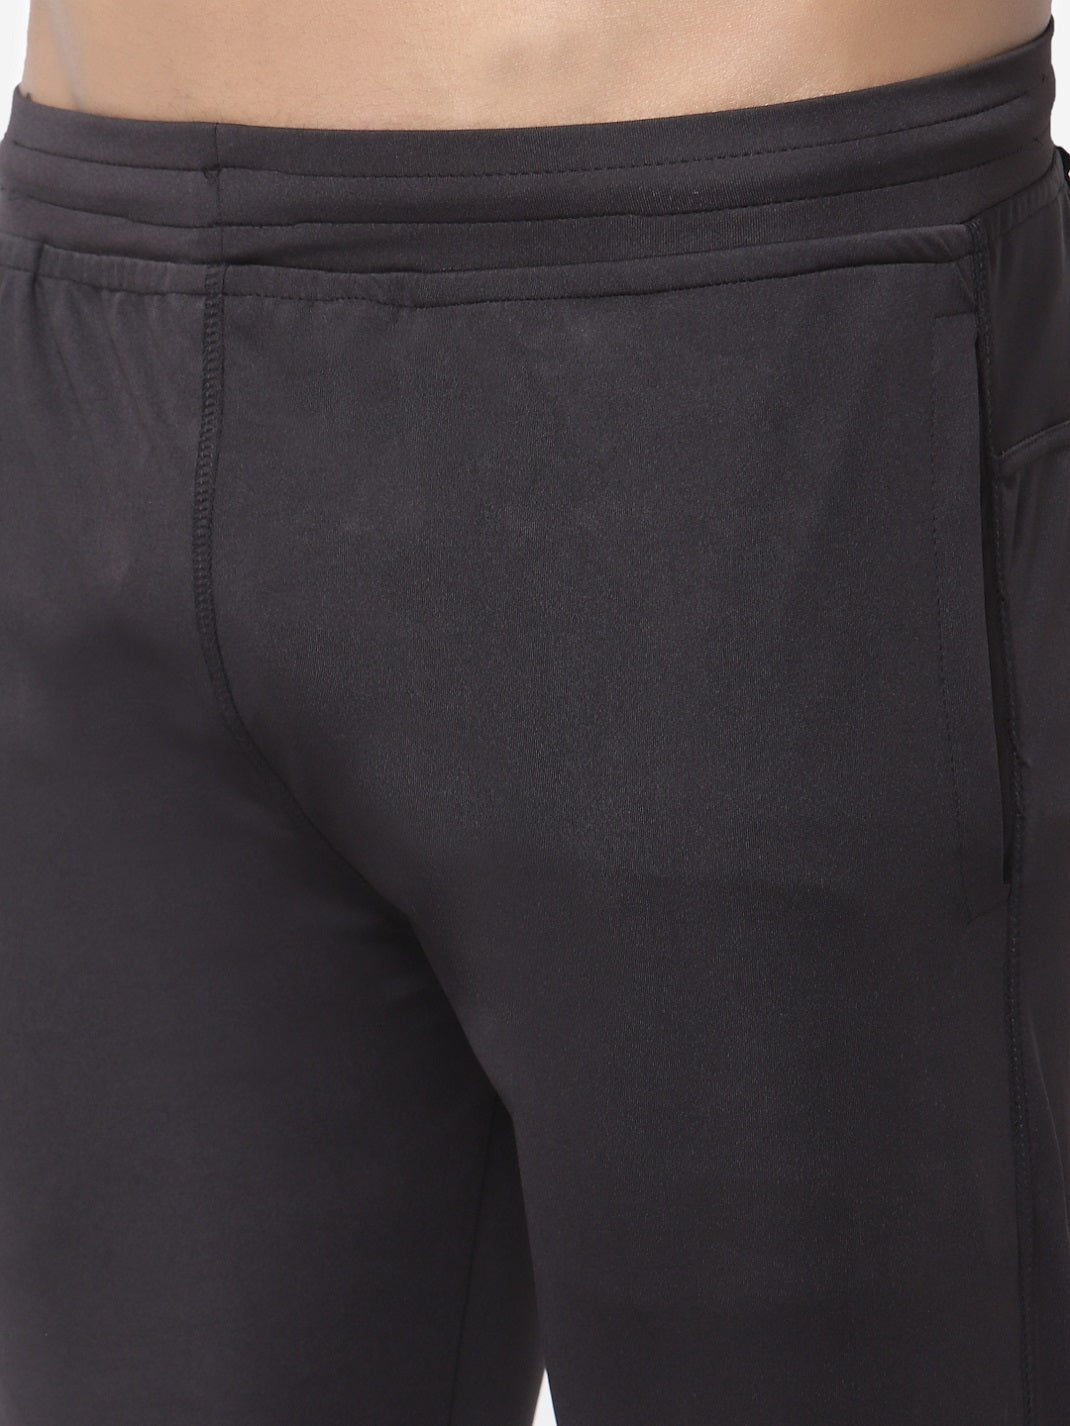 Men's Stretchable Joggers Track Pants for Gym, Yoga, Workout and Casual Wear